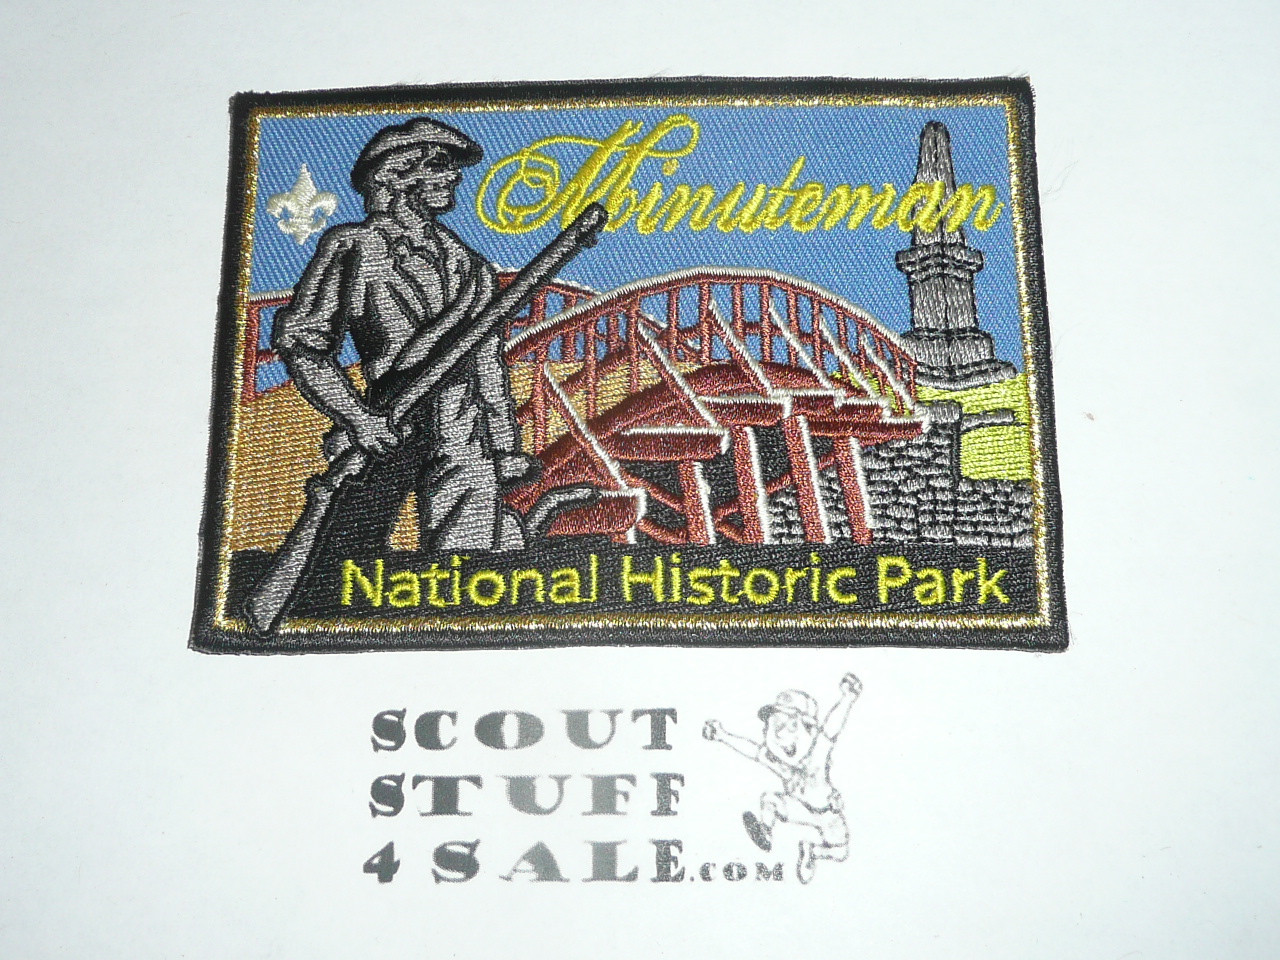 Minuteman National Historic Park Trail Patch, Issued by the Boy Scouts of America